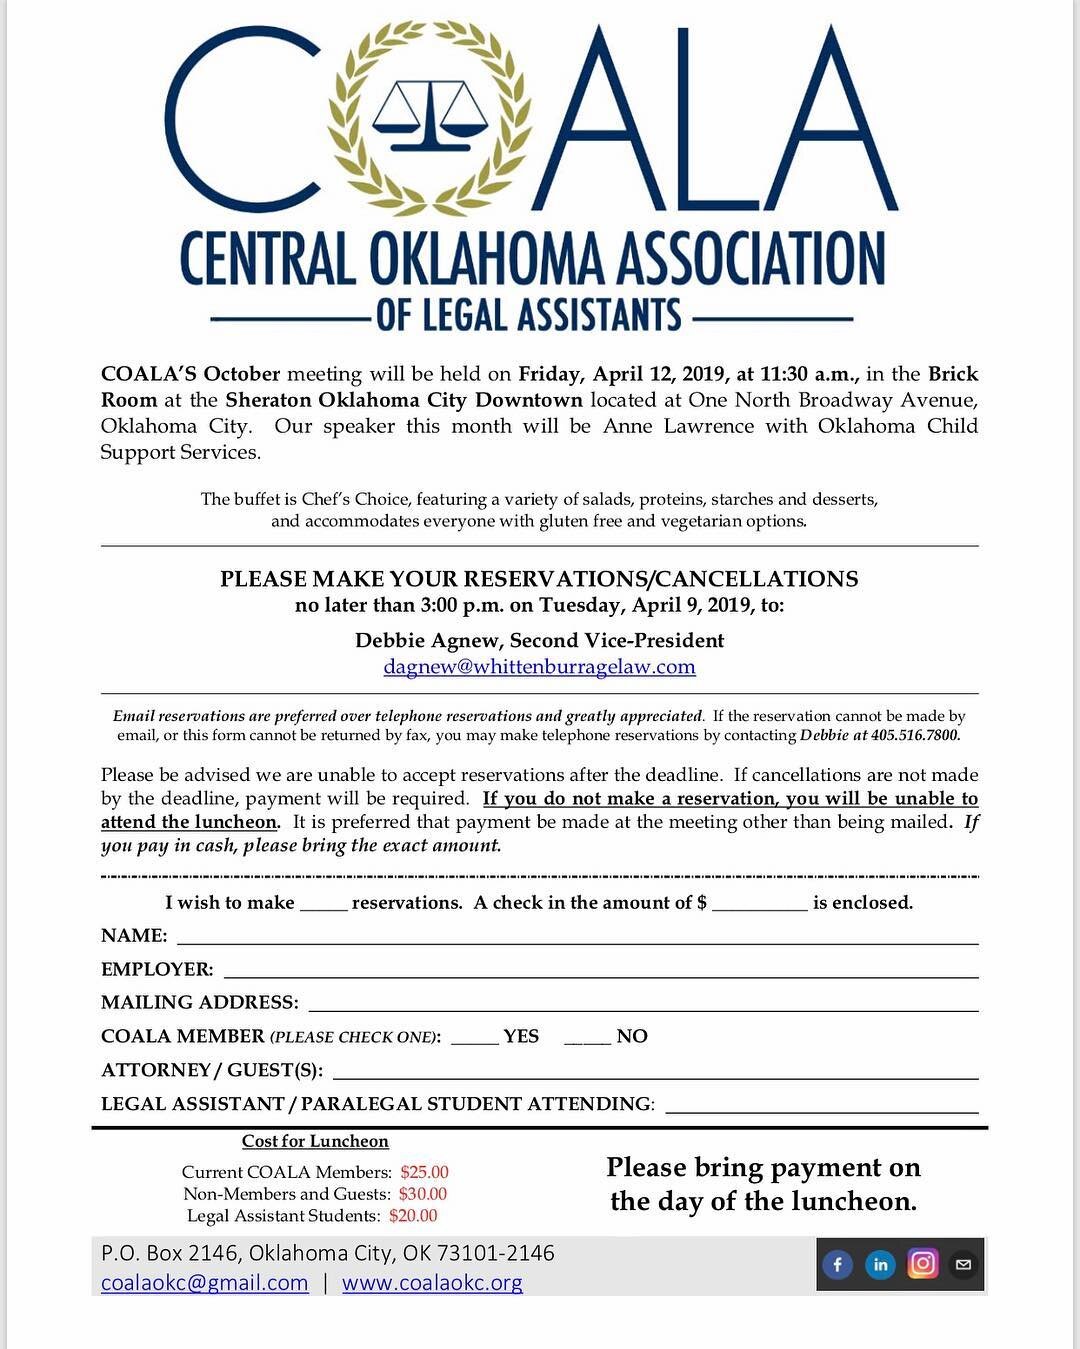 Sign up today to attend our April luncheon to hear Anne Lawrence of Oklahoma Child Support Services. And don&rsquo;t forget about Cocktails &amp; Conversation. Swipe left to see more details. #COALA